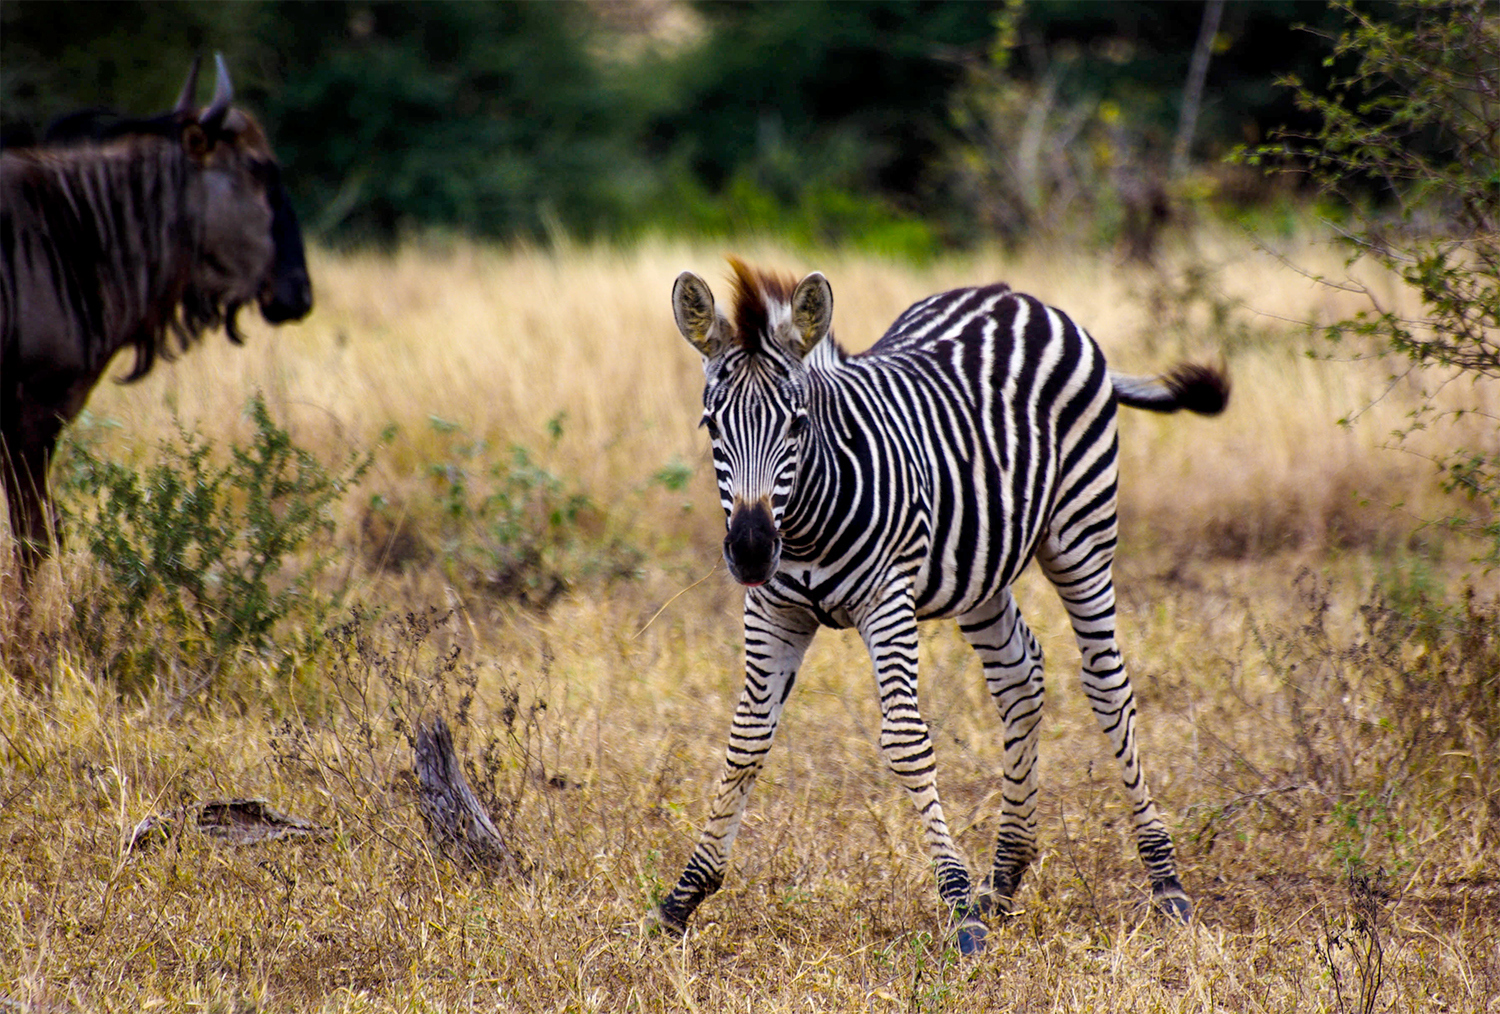 <p>This zebra foal has just about mastered standing on its own four feet. A nearby wildebeest seems unmoved by the achievement.</p>